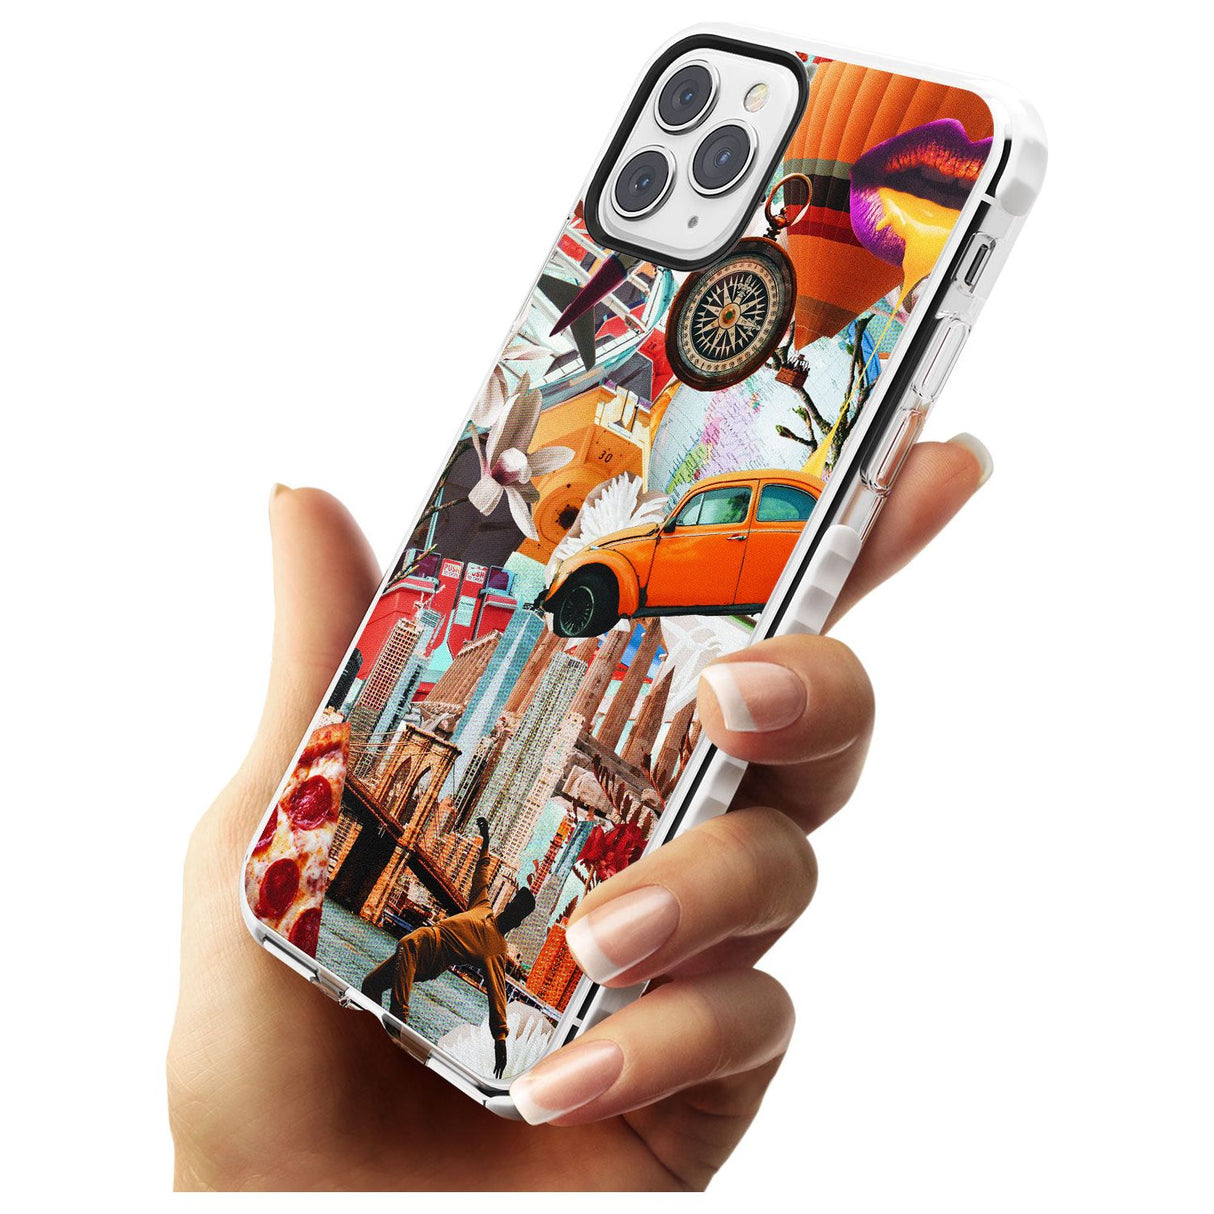 Vintage Collage: New York Mix Impact Phone Case for iPhone 11 Pro Max